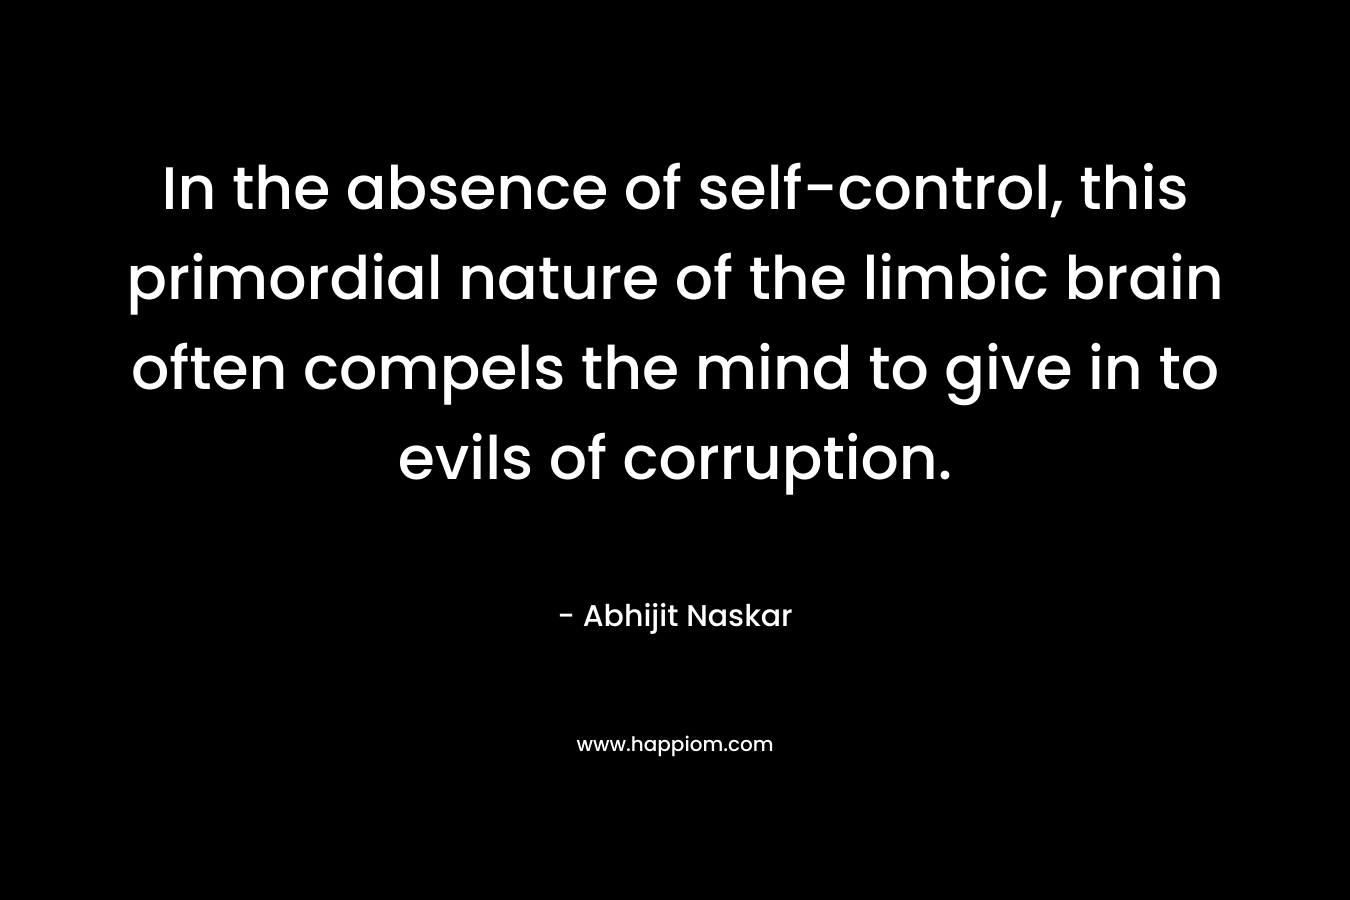 In the absence of self-control, this primordial nature of the limbic brain often compels the mind to give in to evils of corruption. – Abhijit Naskar